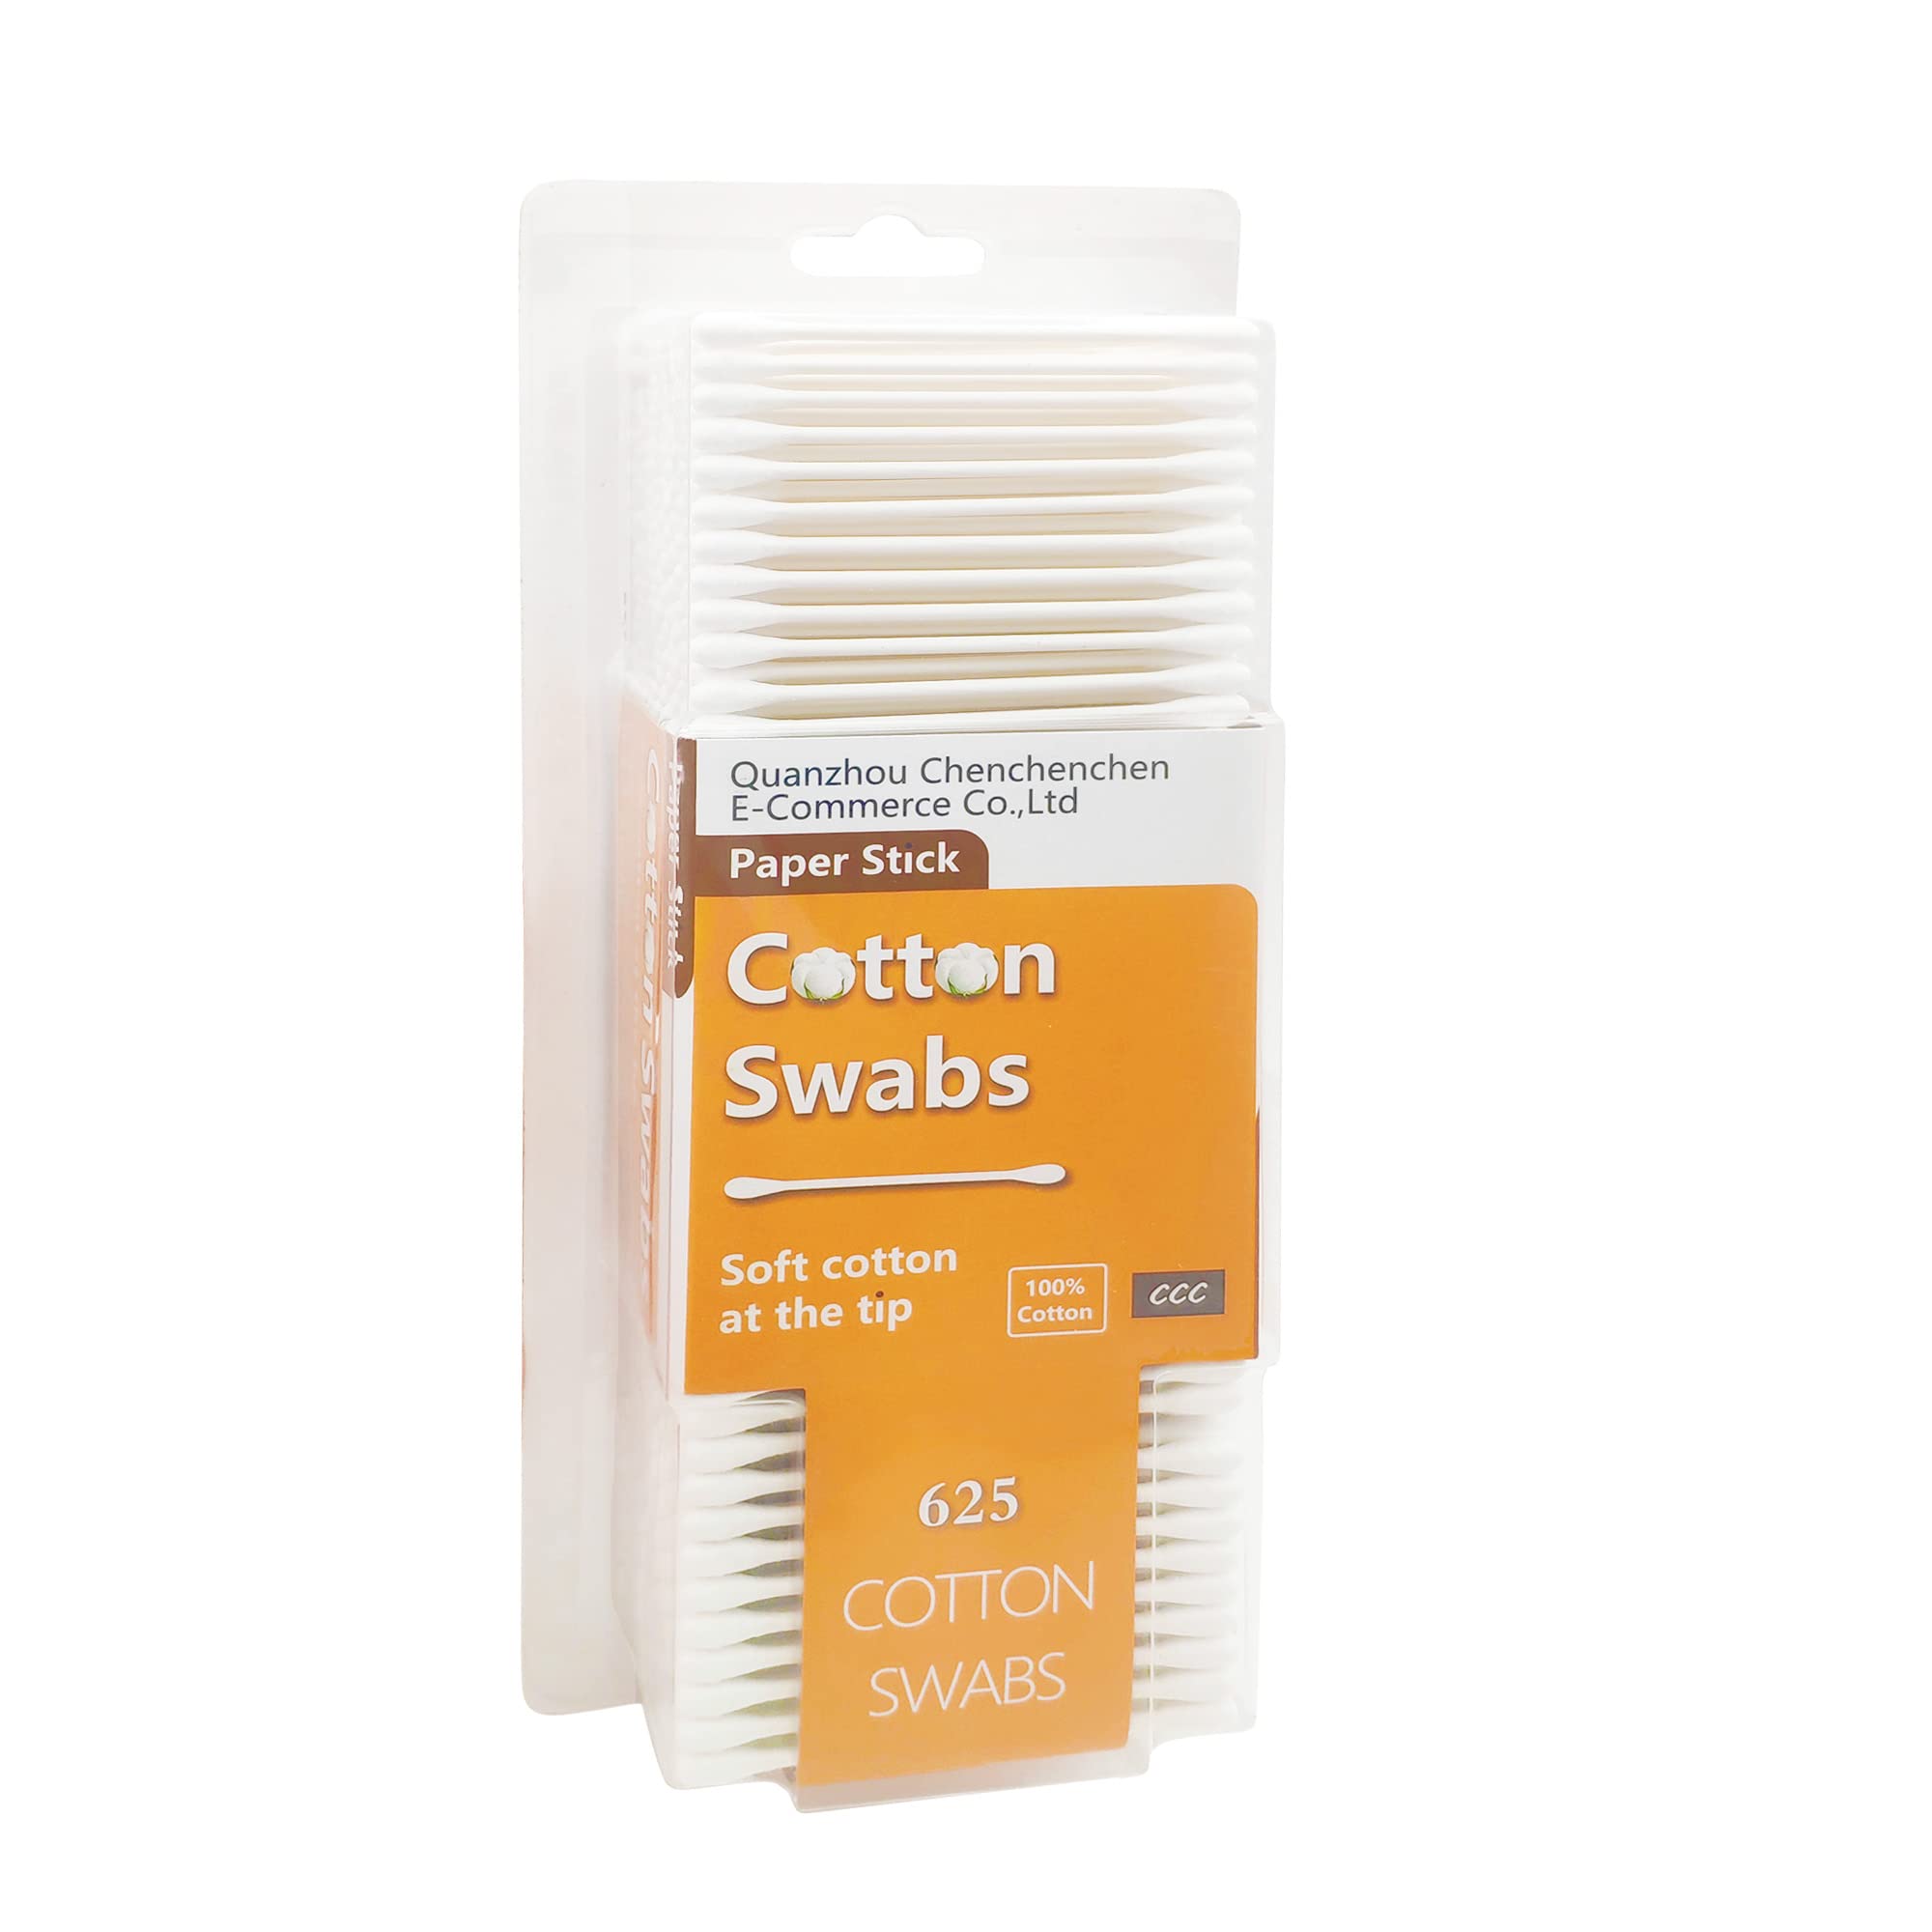 Cotton Swabs with Paper Sticks 625ct, Biodegradable Double Tipped Cotton Buds for Beauty& Personal Care